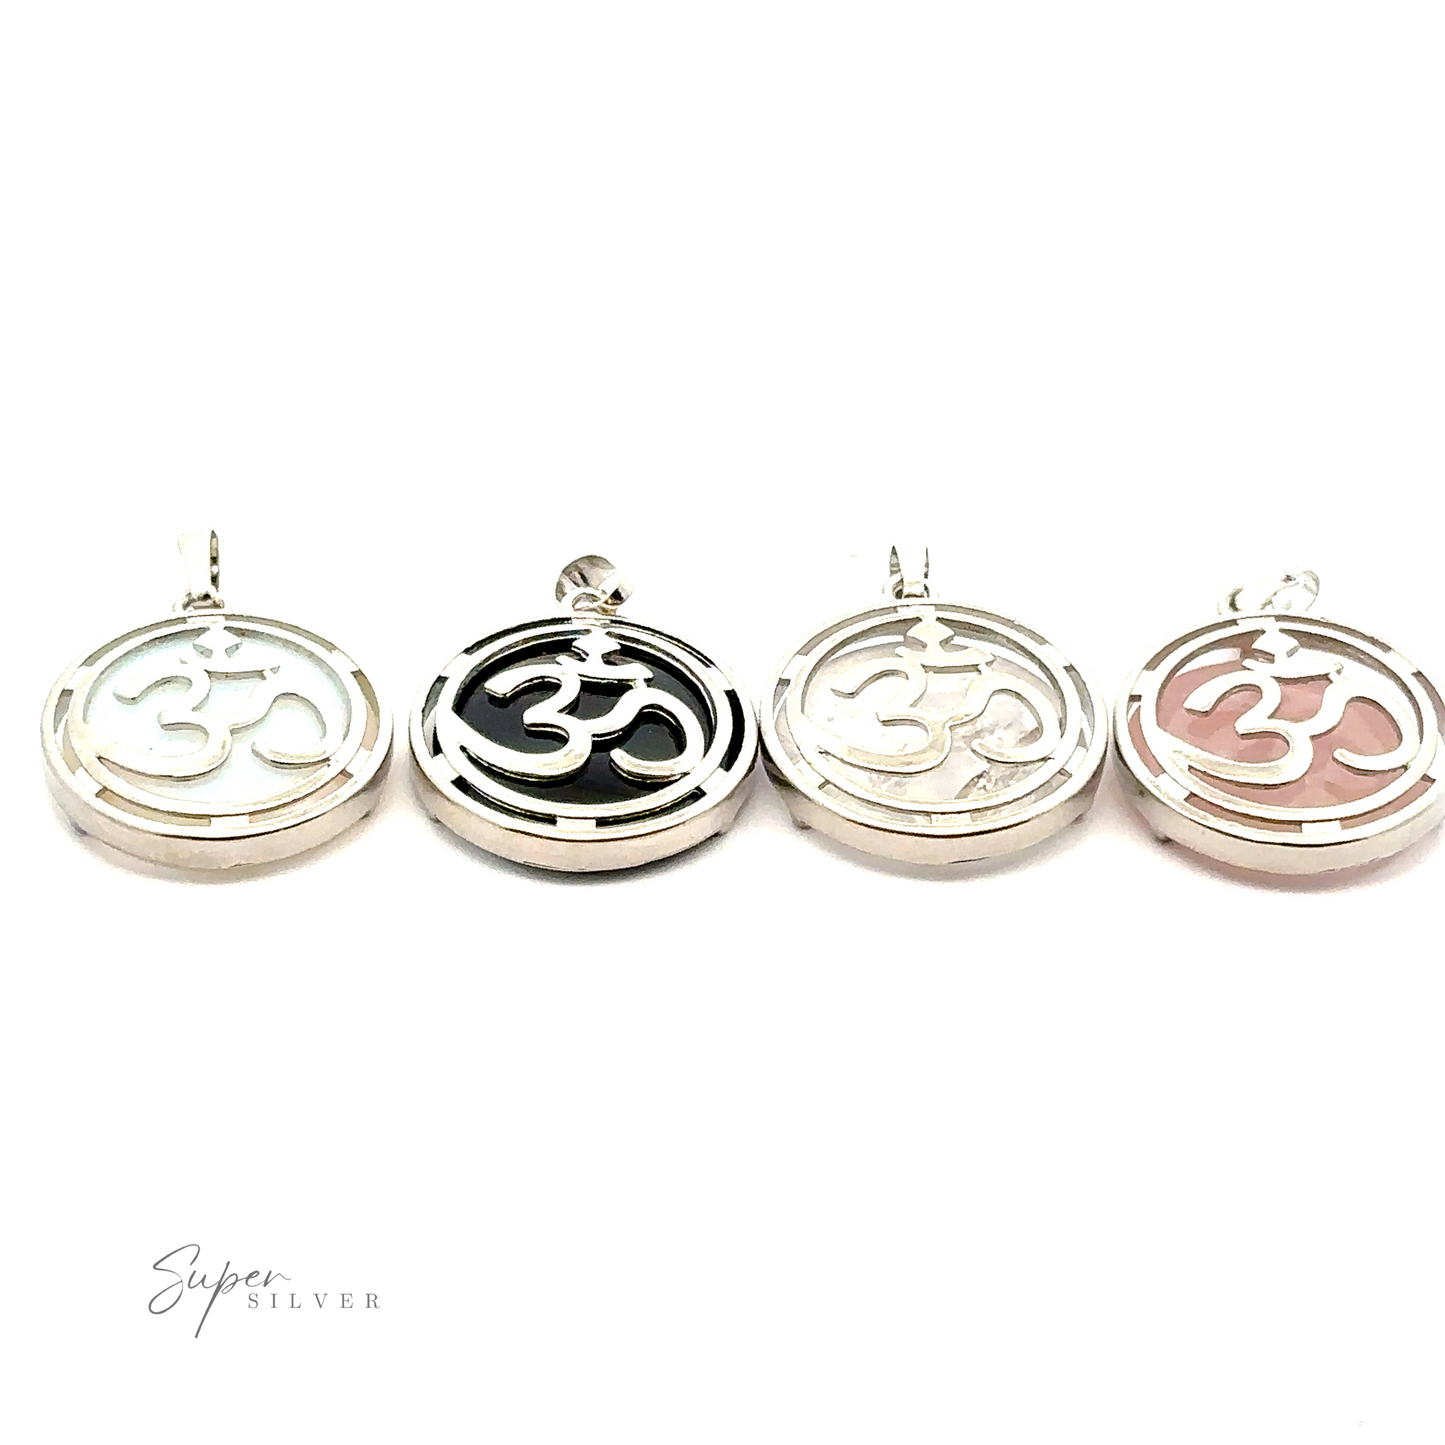 Four silver-plated Om Pendant necklaces featuring backgrounds in white, black, light pink, and light grey. The brand name "Super Silver" is in the lower left corner. Some designs incorporate opalite for an added touch of elegance.